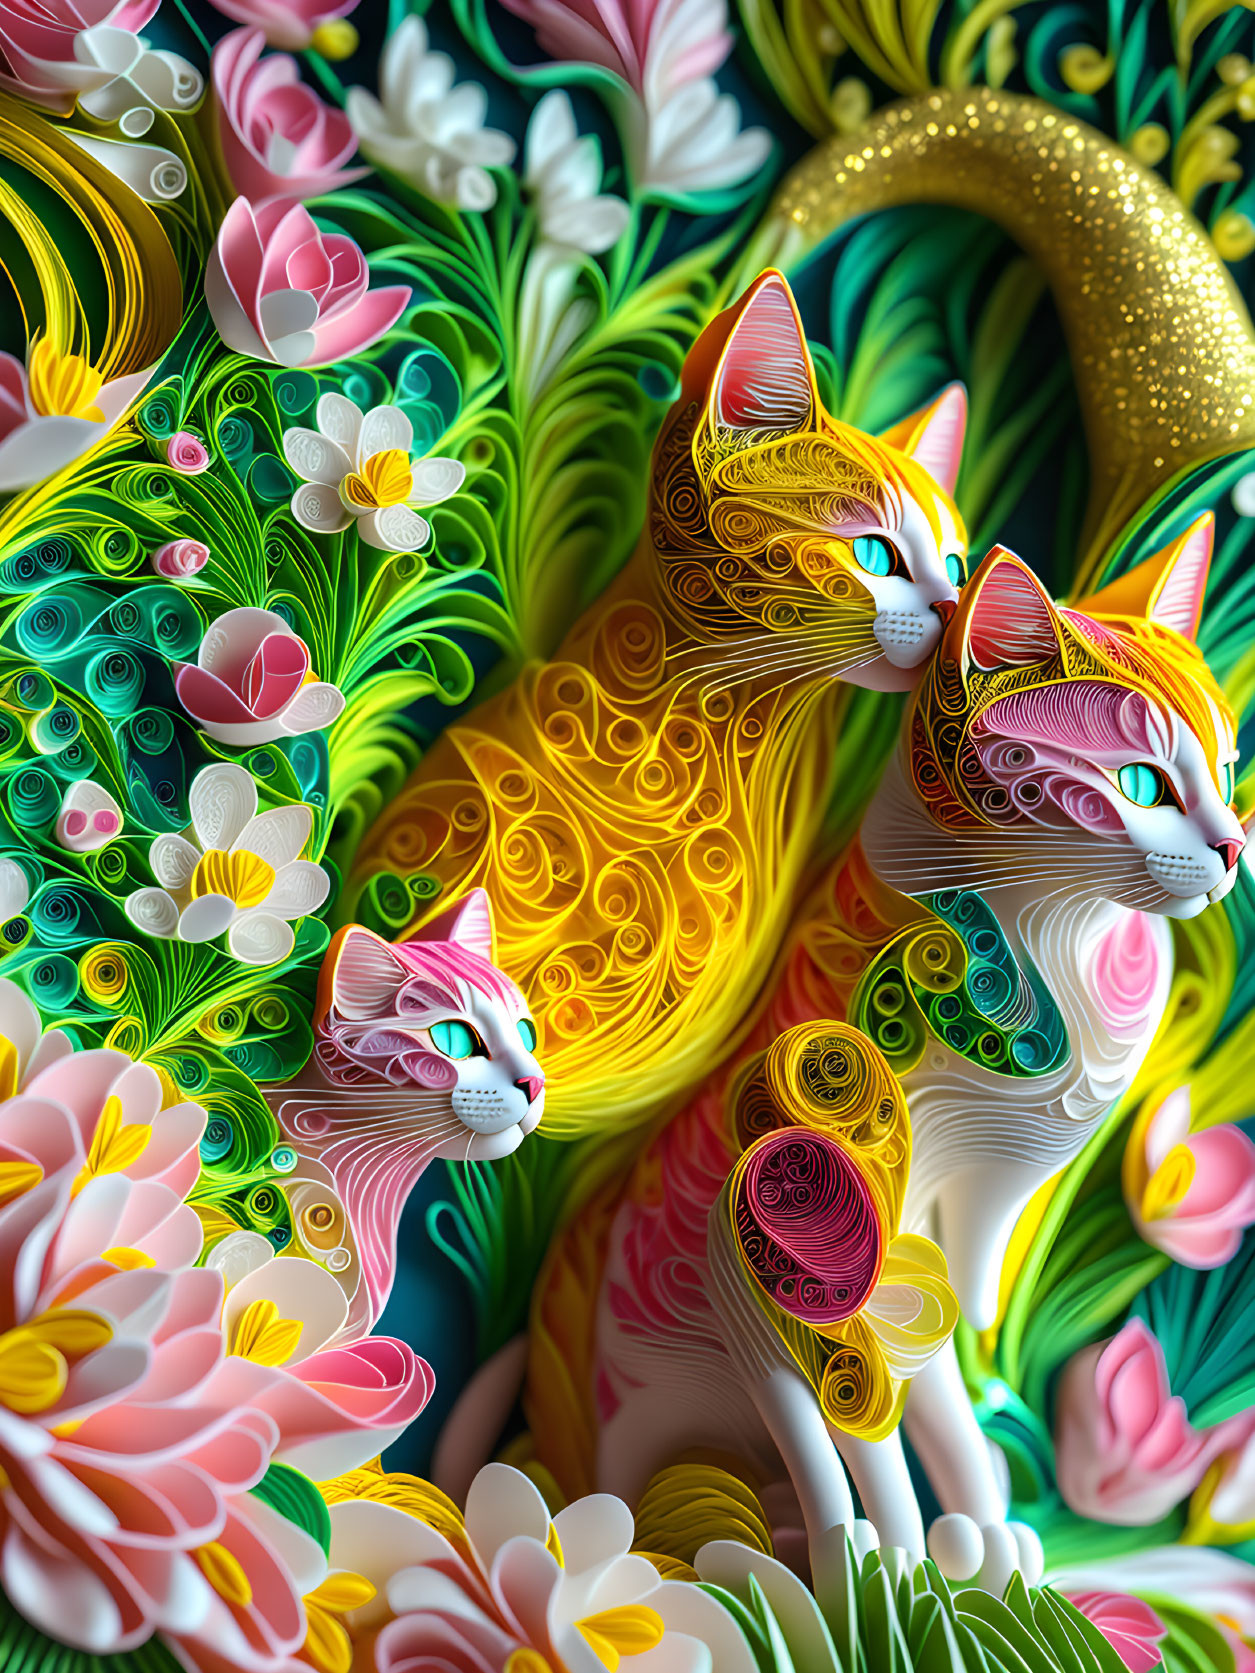 Paper Cut, quilling, photorealistic, pink cats, ye